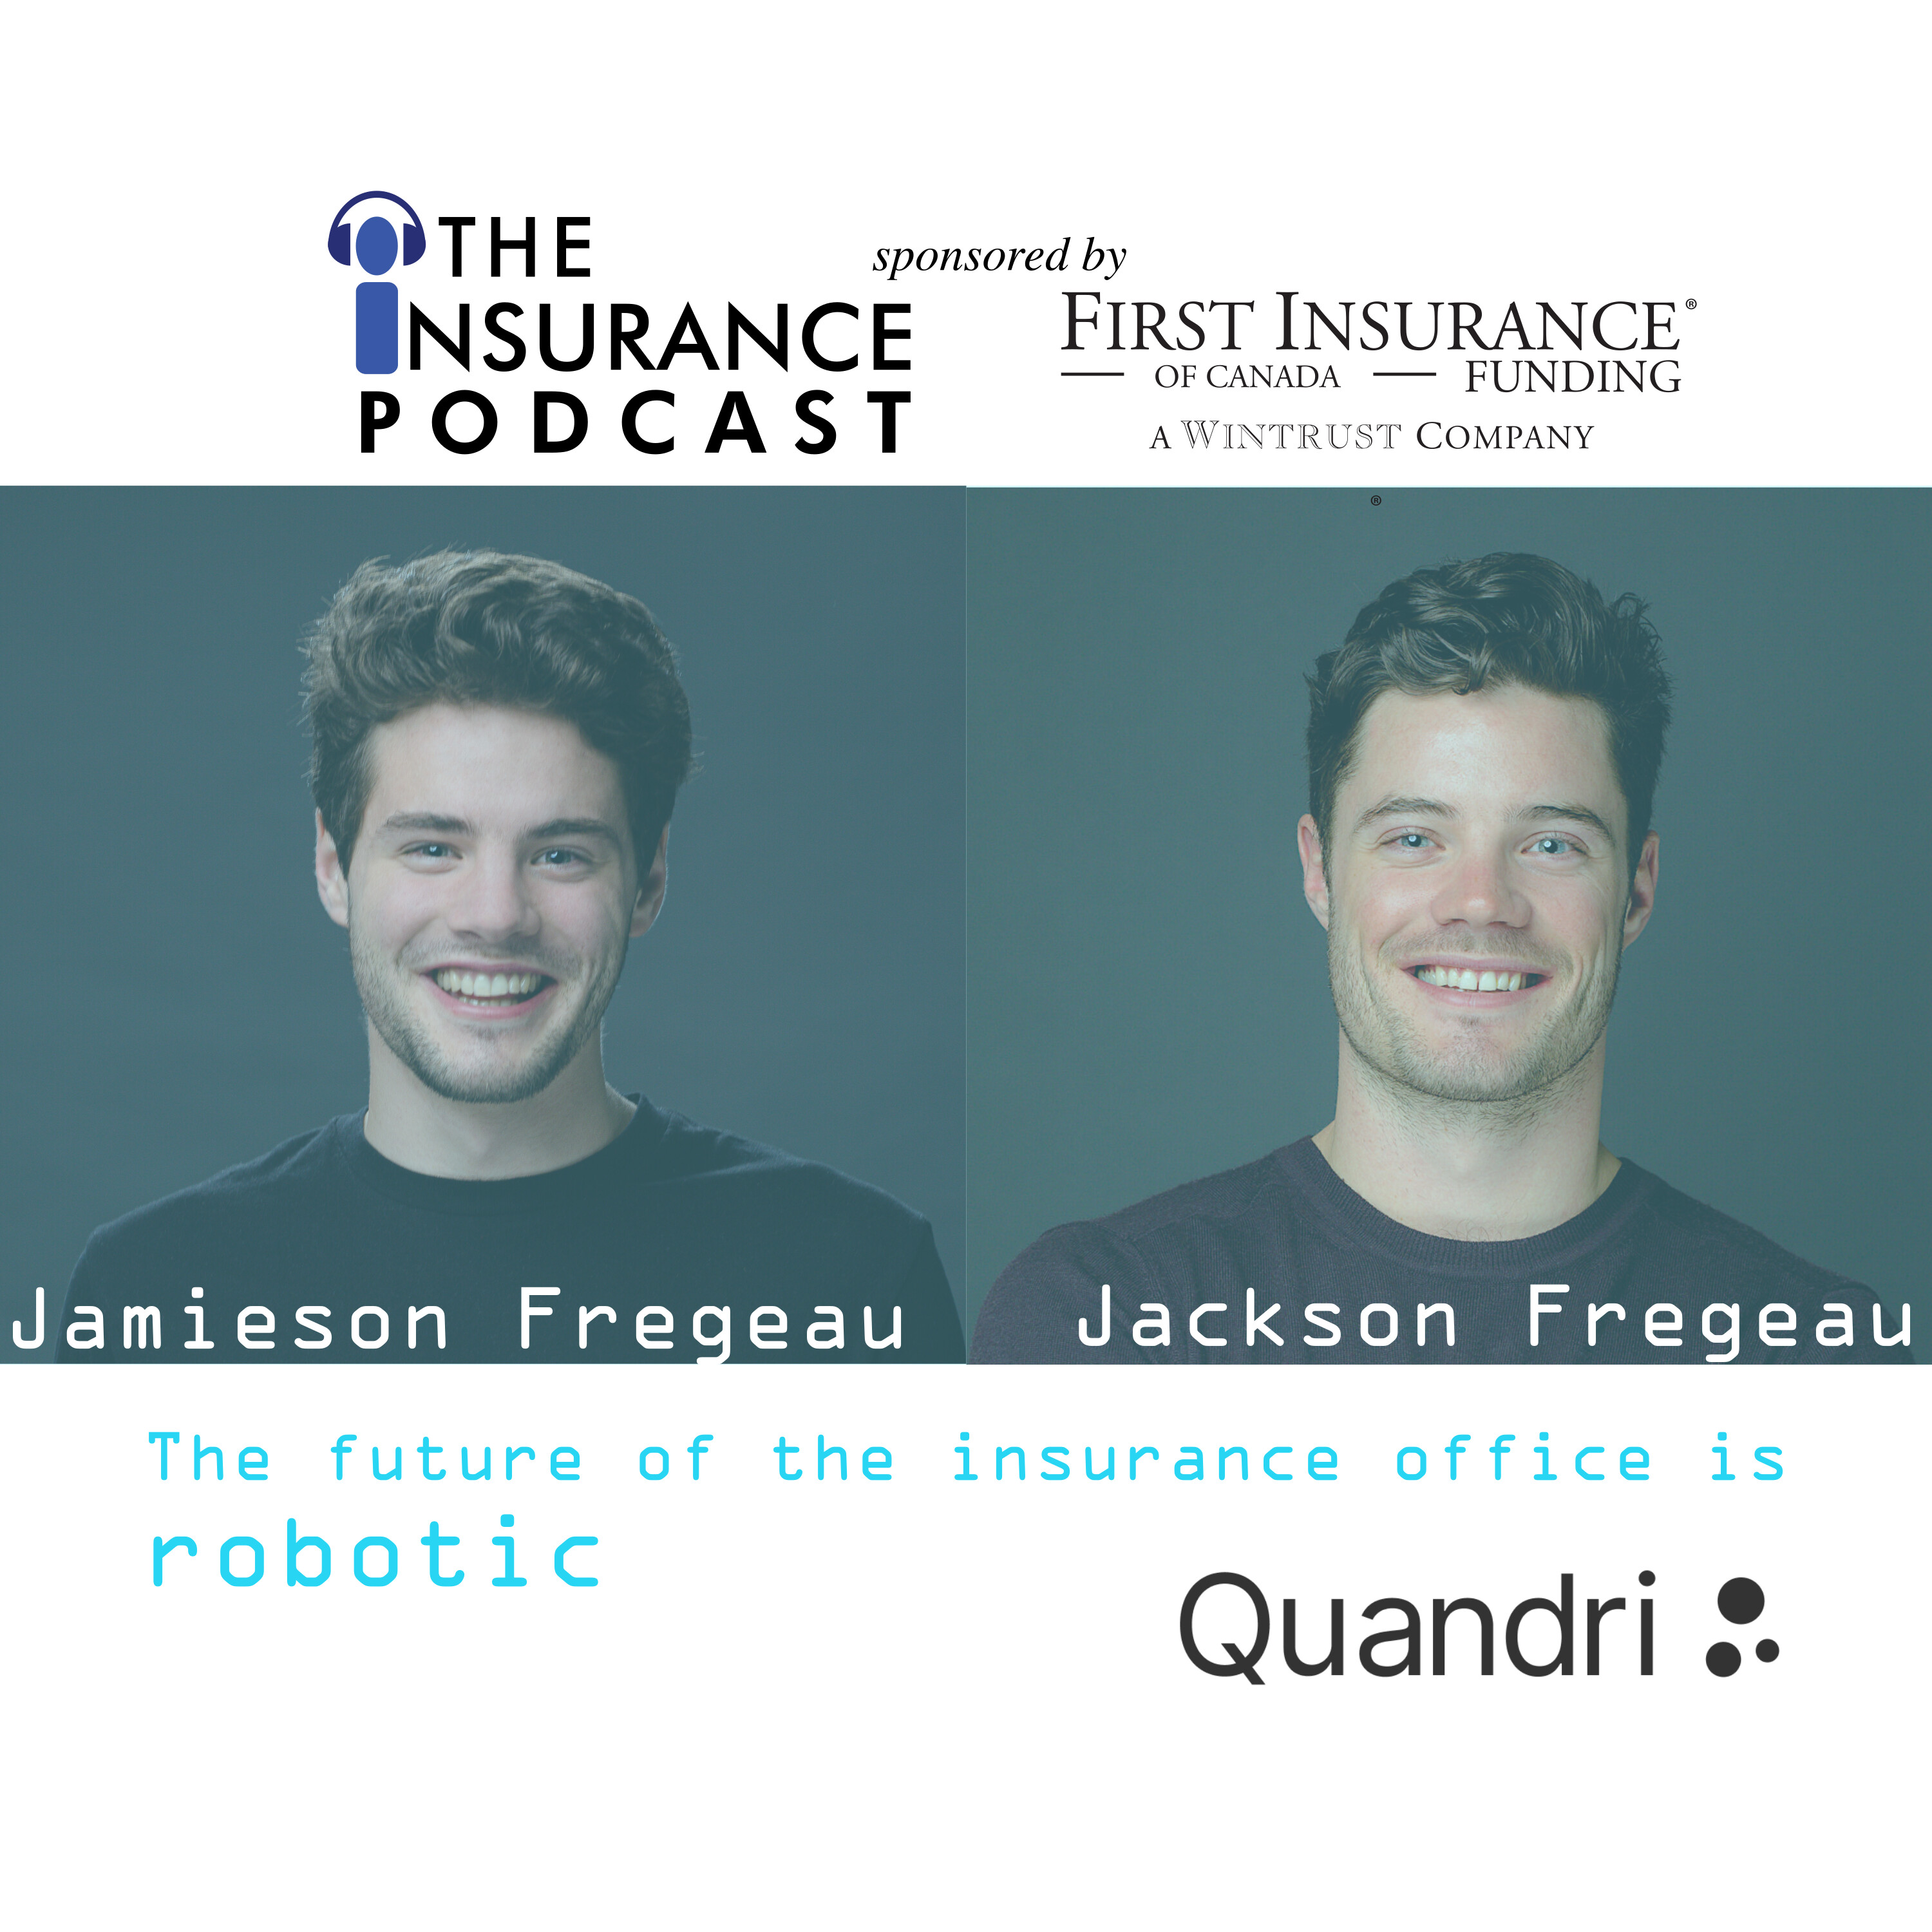 Robotic workers are the insurance back-office future with Quandri